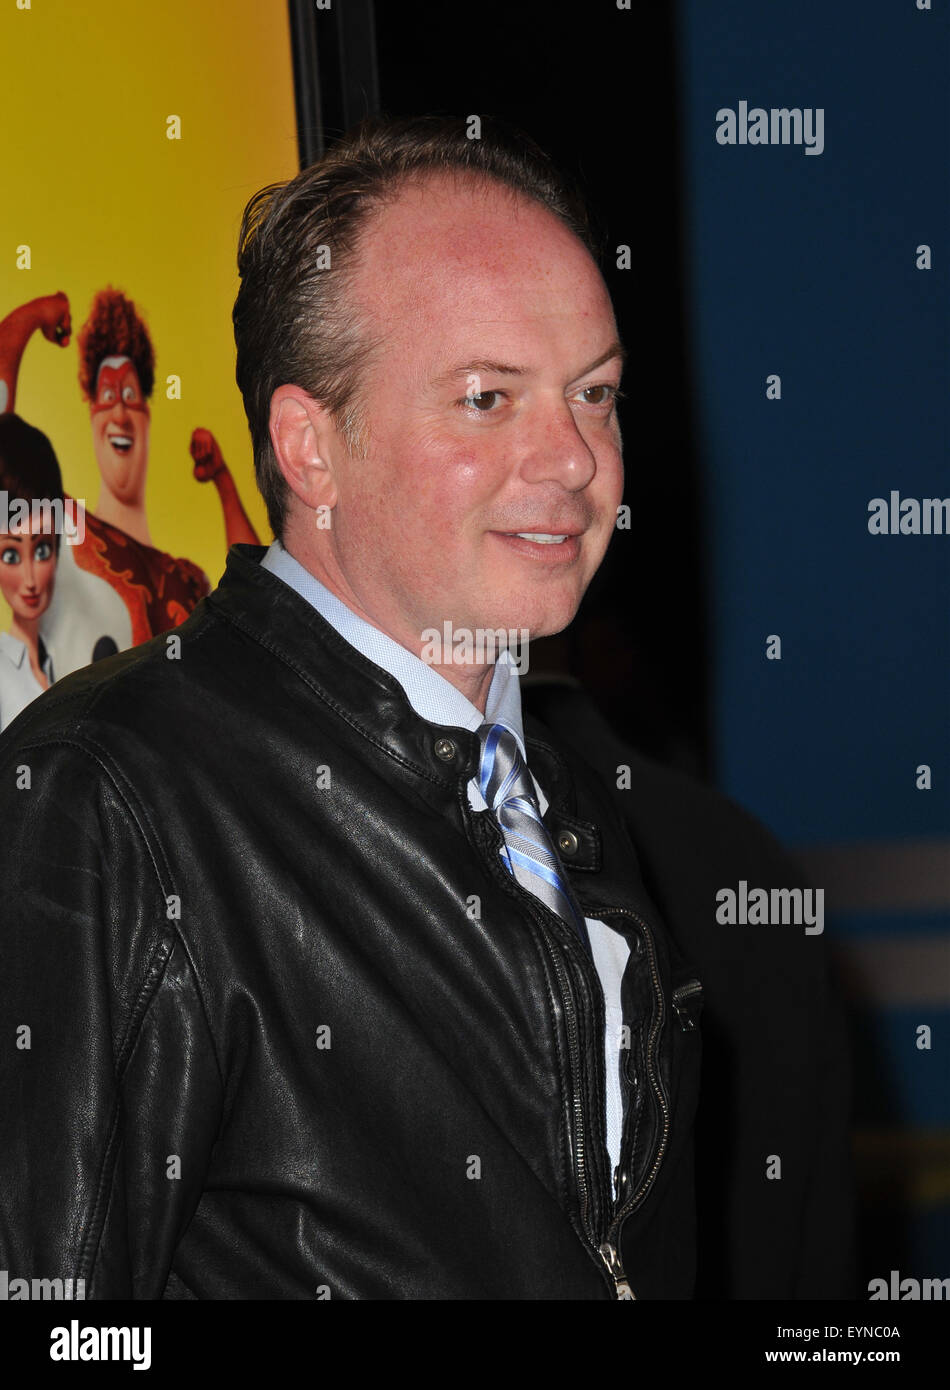 LOS ANGELES, CA - OCTOBER 30, 2010: Director Tom McGrath at the Los Angeles premiere of his new movie 'MegaMind' at Mann's Chinese Theatre, Hollywood. Stock Photo